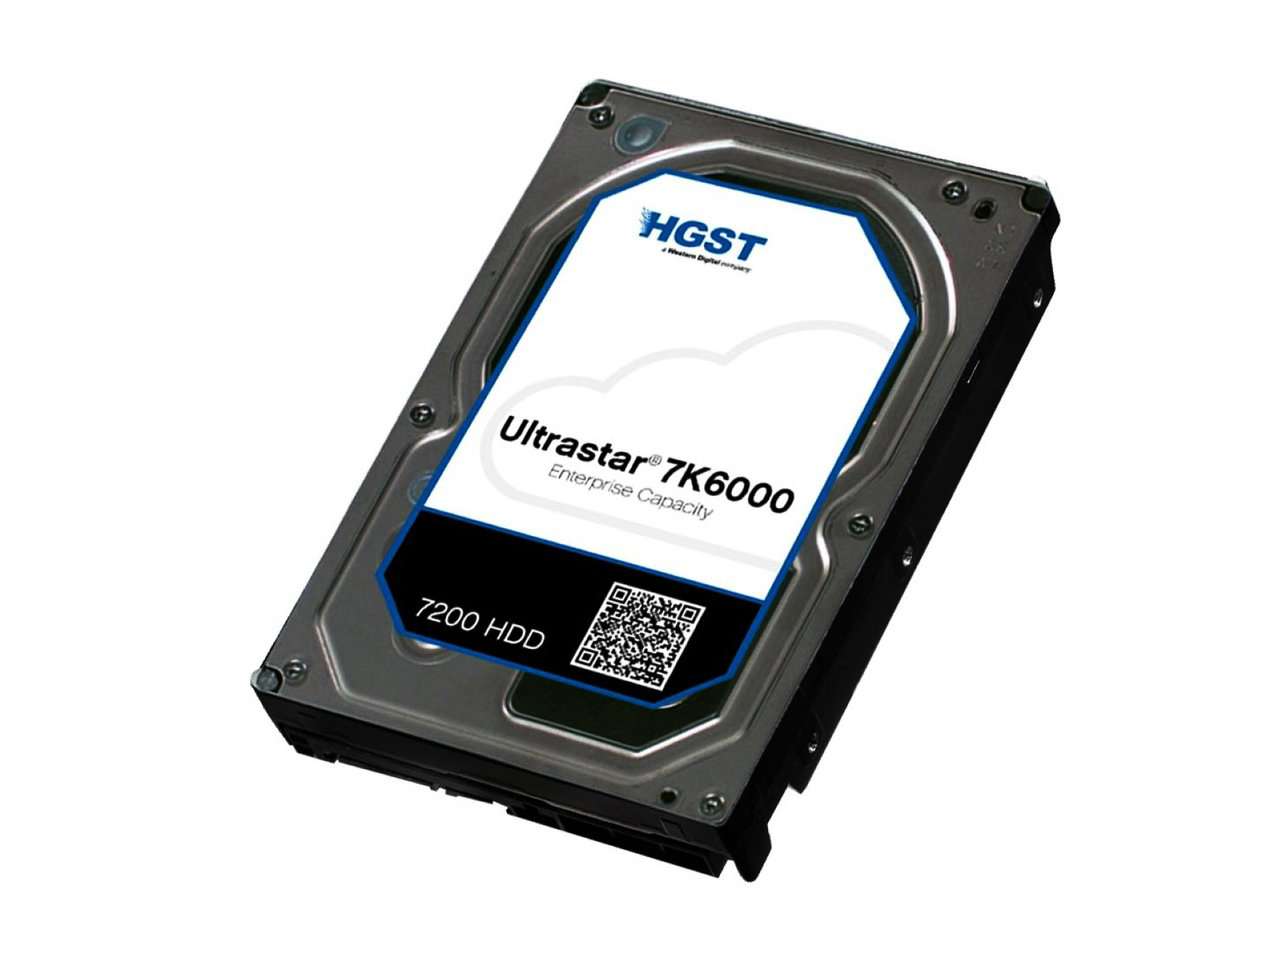 HGST Ultrastar 7K6000 0F22790  HUS726060AL4210 6TB 7.2K RPM SAS 12Gb/s 4Kn 128MB Cache 3.5" ISE HDD